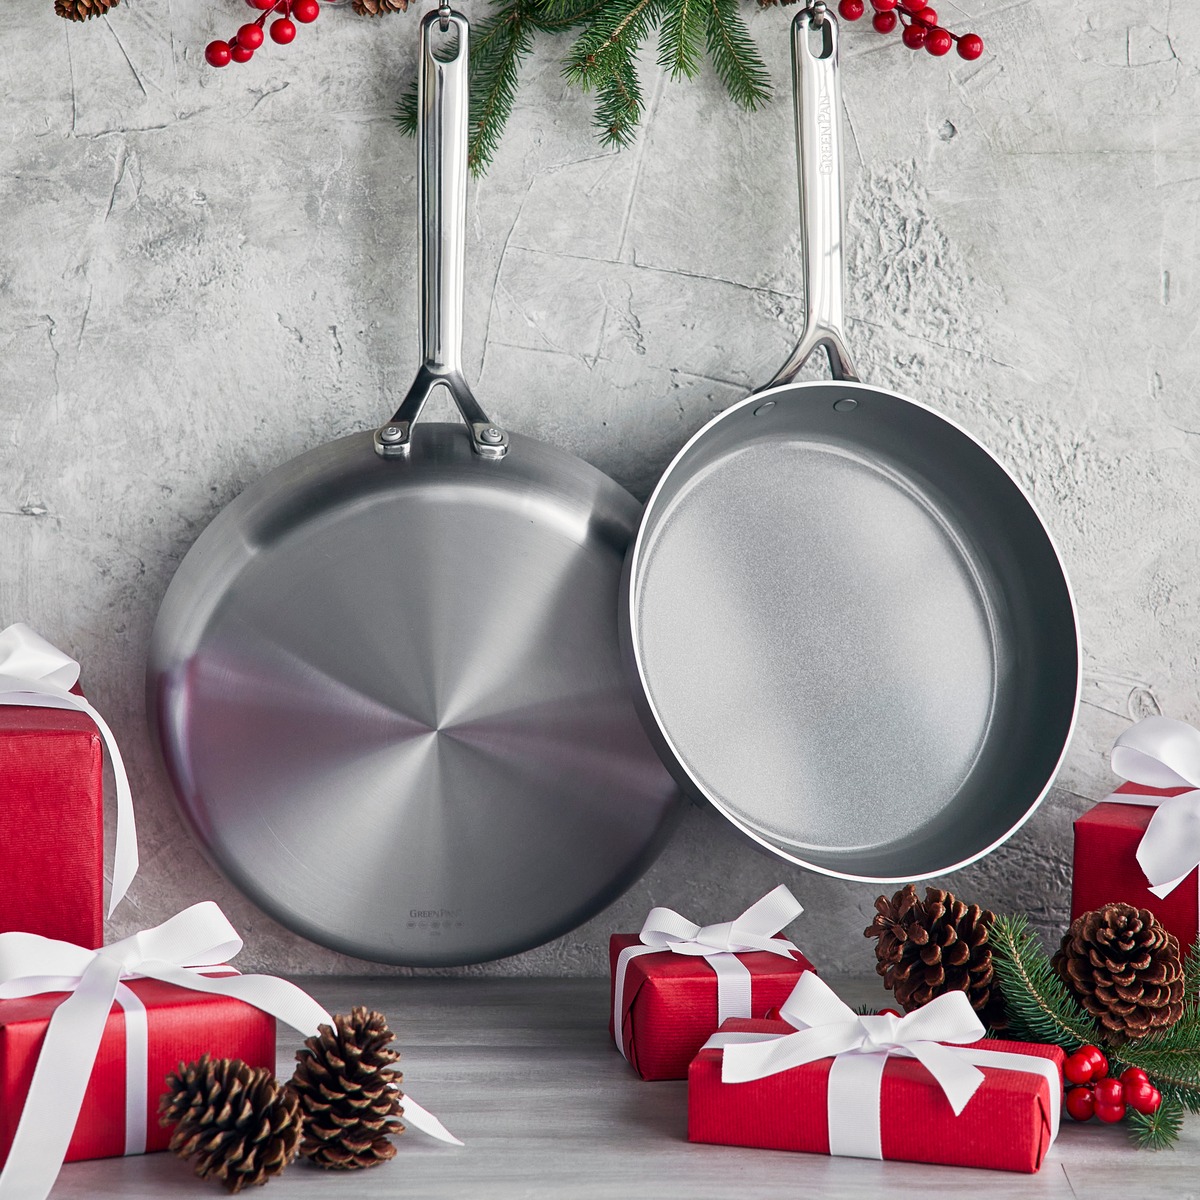 TriClad Ceramic Nonstick 9.5 and 11 Frypan Set